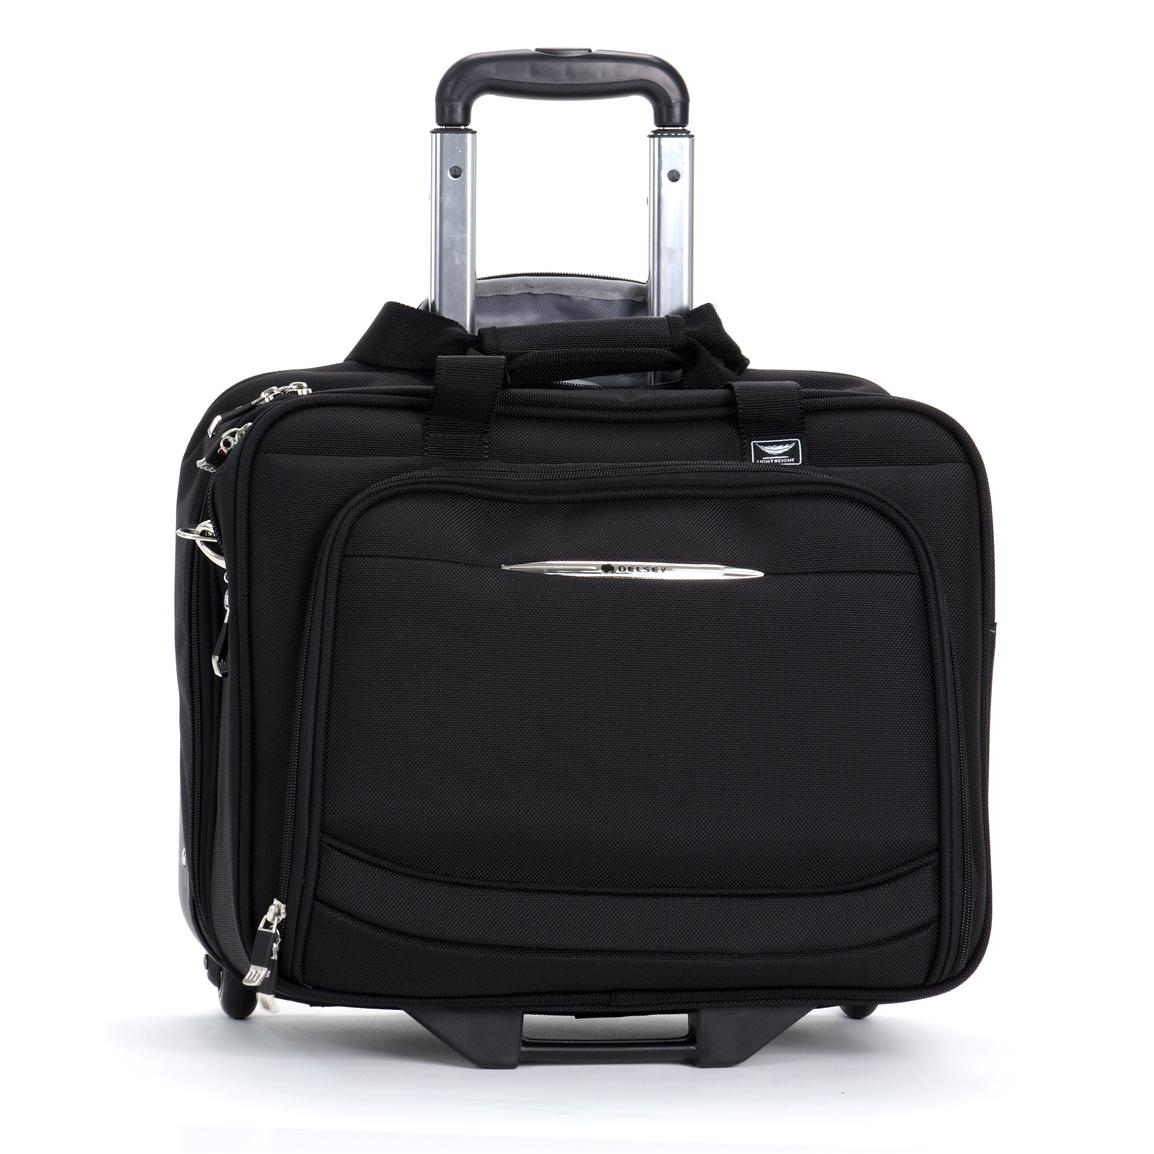 Delsey® Helium Pilot Trolley Tote - 142547, Tote Bags at Sportsman's Guide